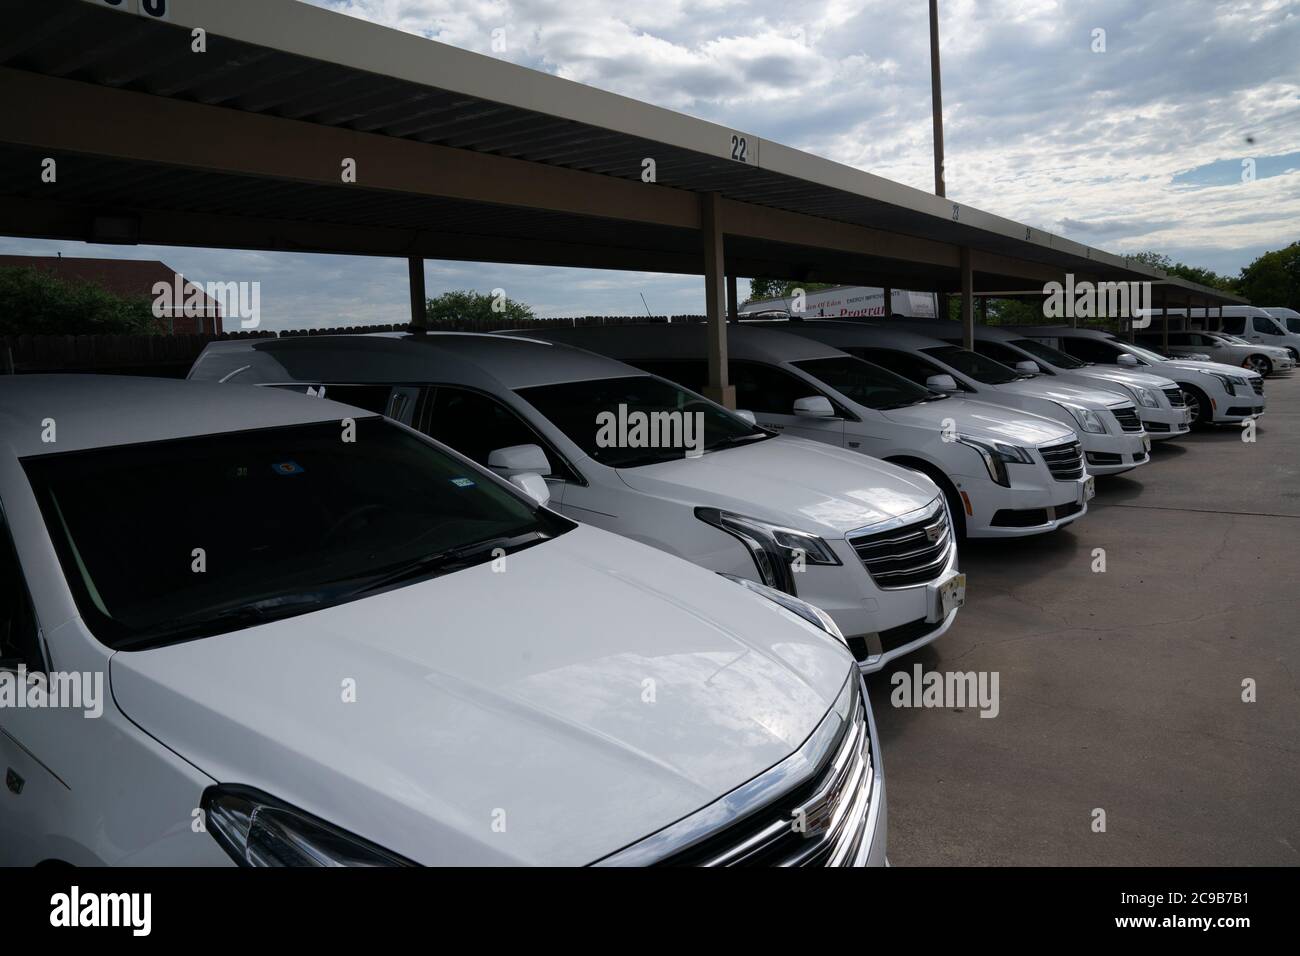 Dallas, TX, USA. 29th July, 2020. Hearses in the parking lot at The Golden Gate Funeral Home in Dallas, Texas on July 29, 2020. Funeral Funeral home director John Beckwith has prepared his staff and operation for an increase in COVID-19 related deaths over the coming weeks. Credit: Bryan Smith/ZUMA Wire/Alamy Live News Stock Photo